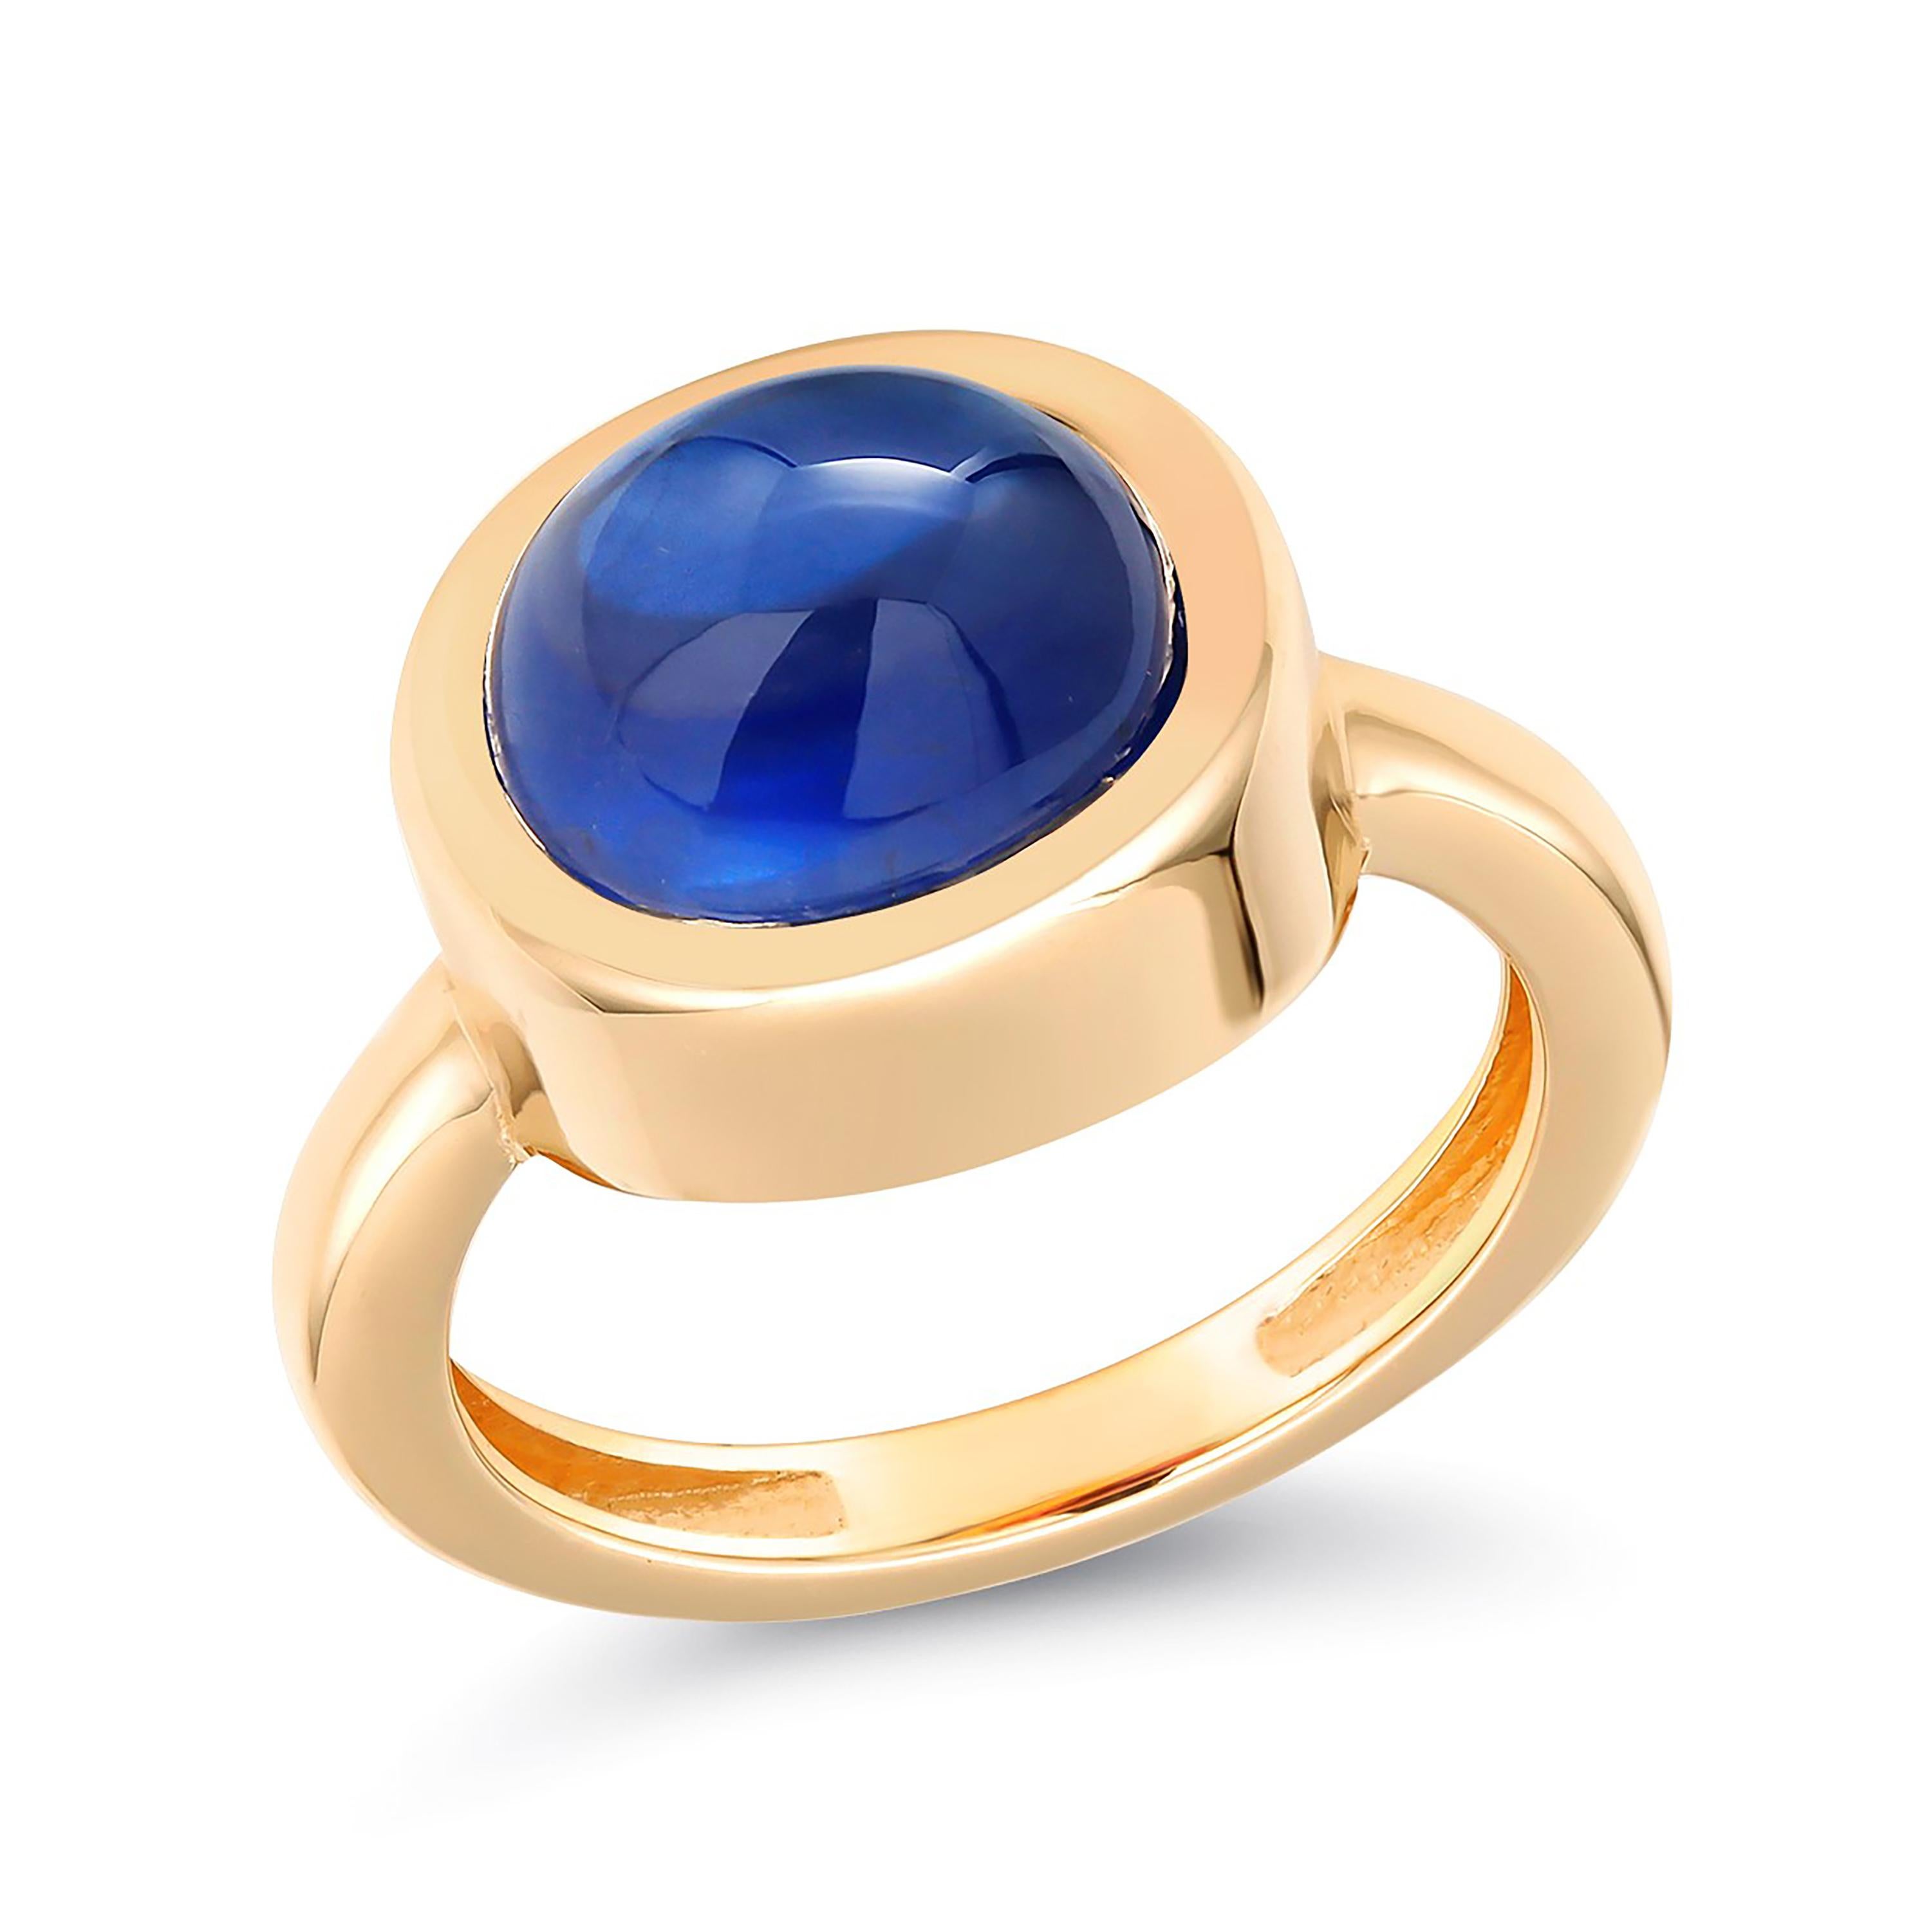 Modern Cabochon Sapphire Raised Dome Yellow Gold Cocktail Ring Weighing 4.40 Carats